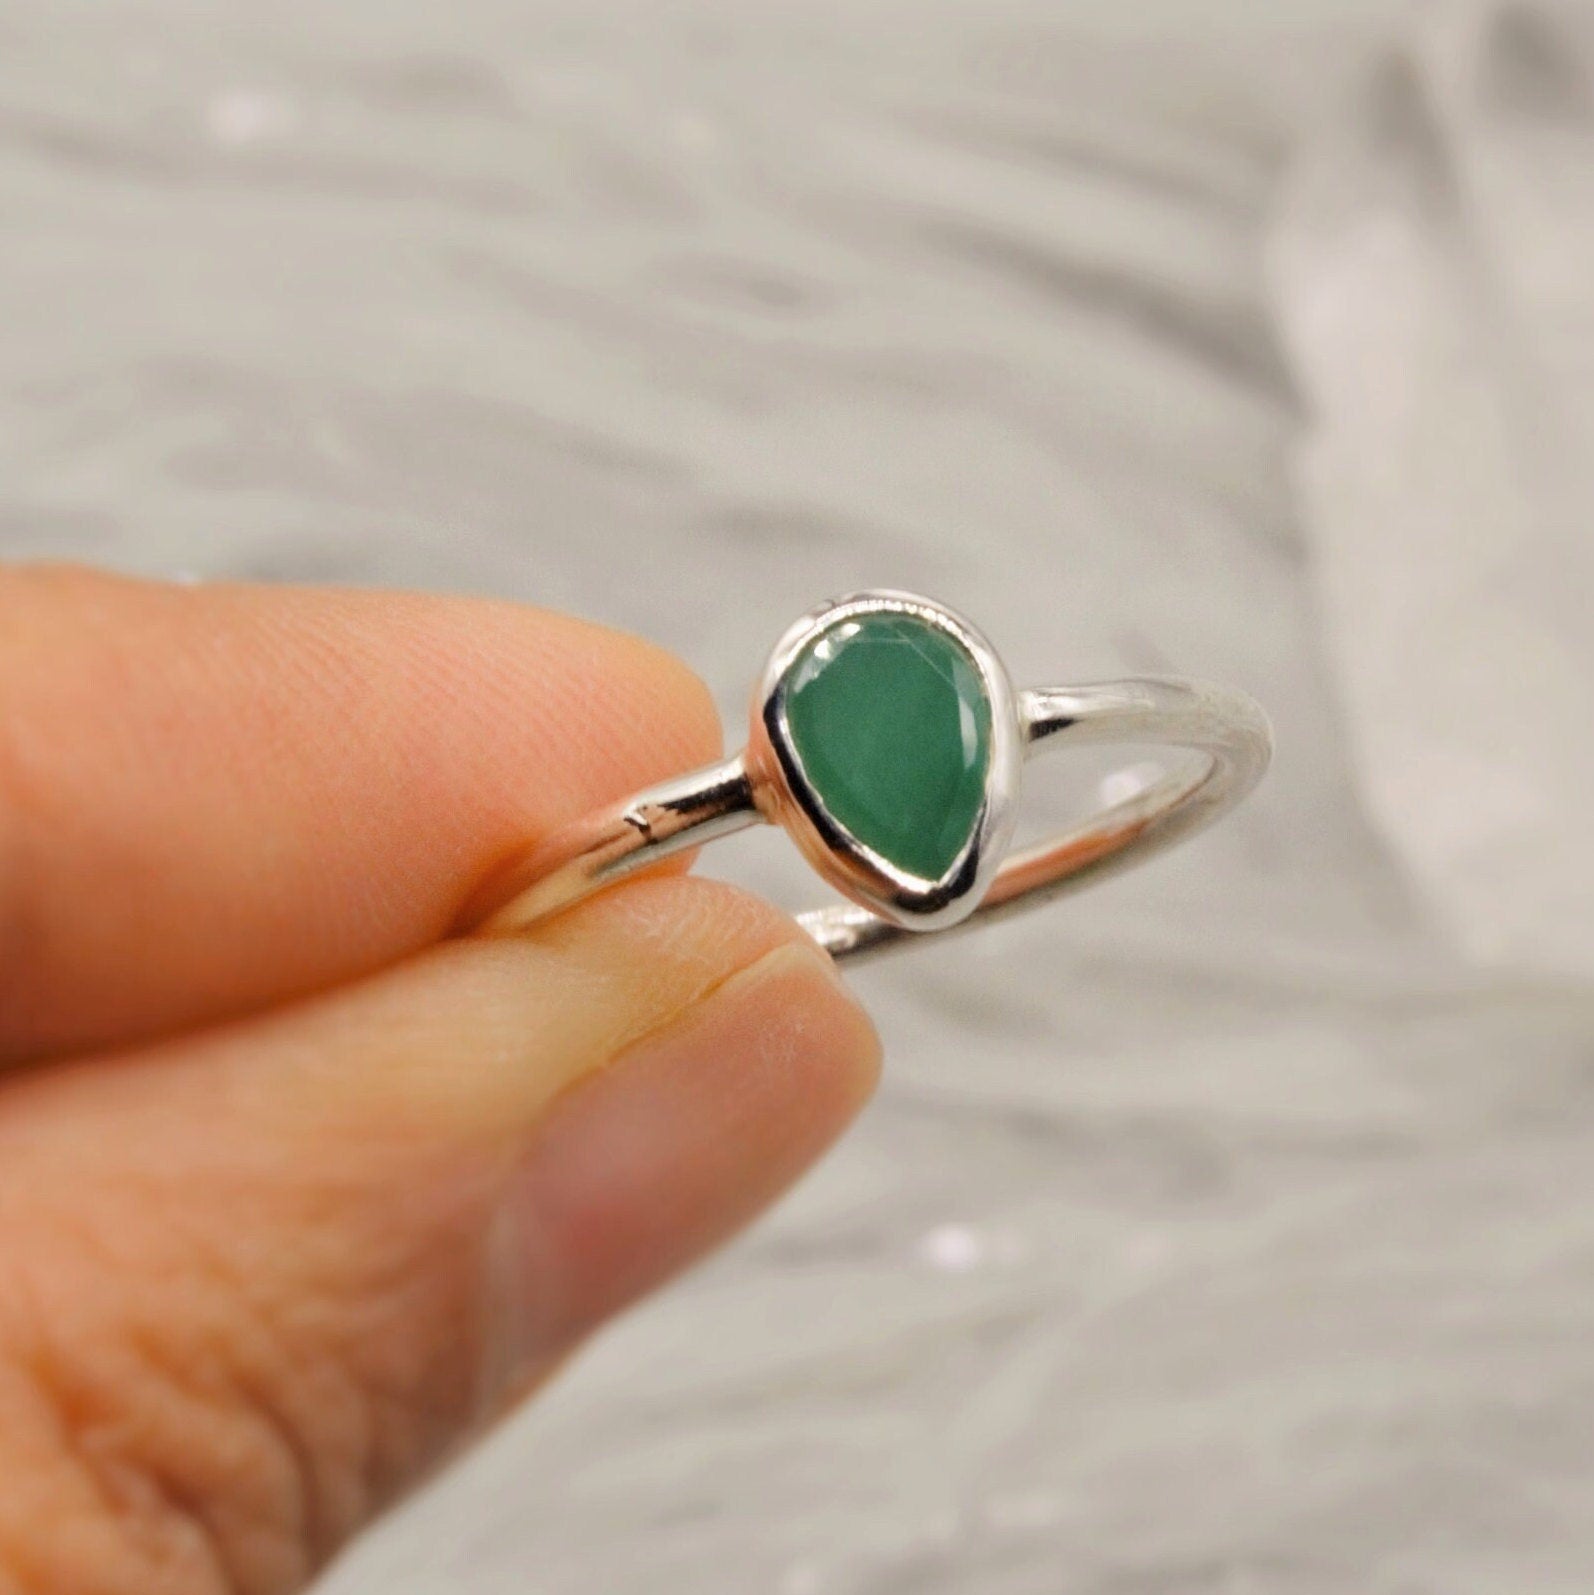 Emerald Ring, Green Dainty Silver Ring, Emerald Jewelry, Sterling Silver, May Birthstone, Rings for Women, Handmade Stacking Ring, Birthday